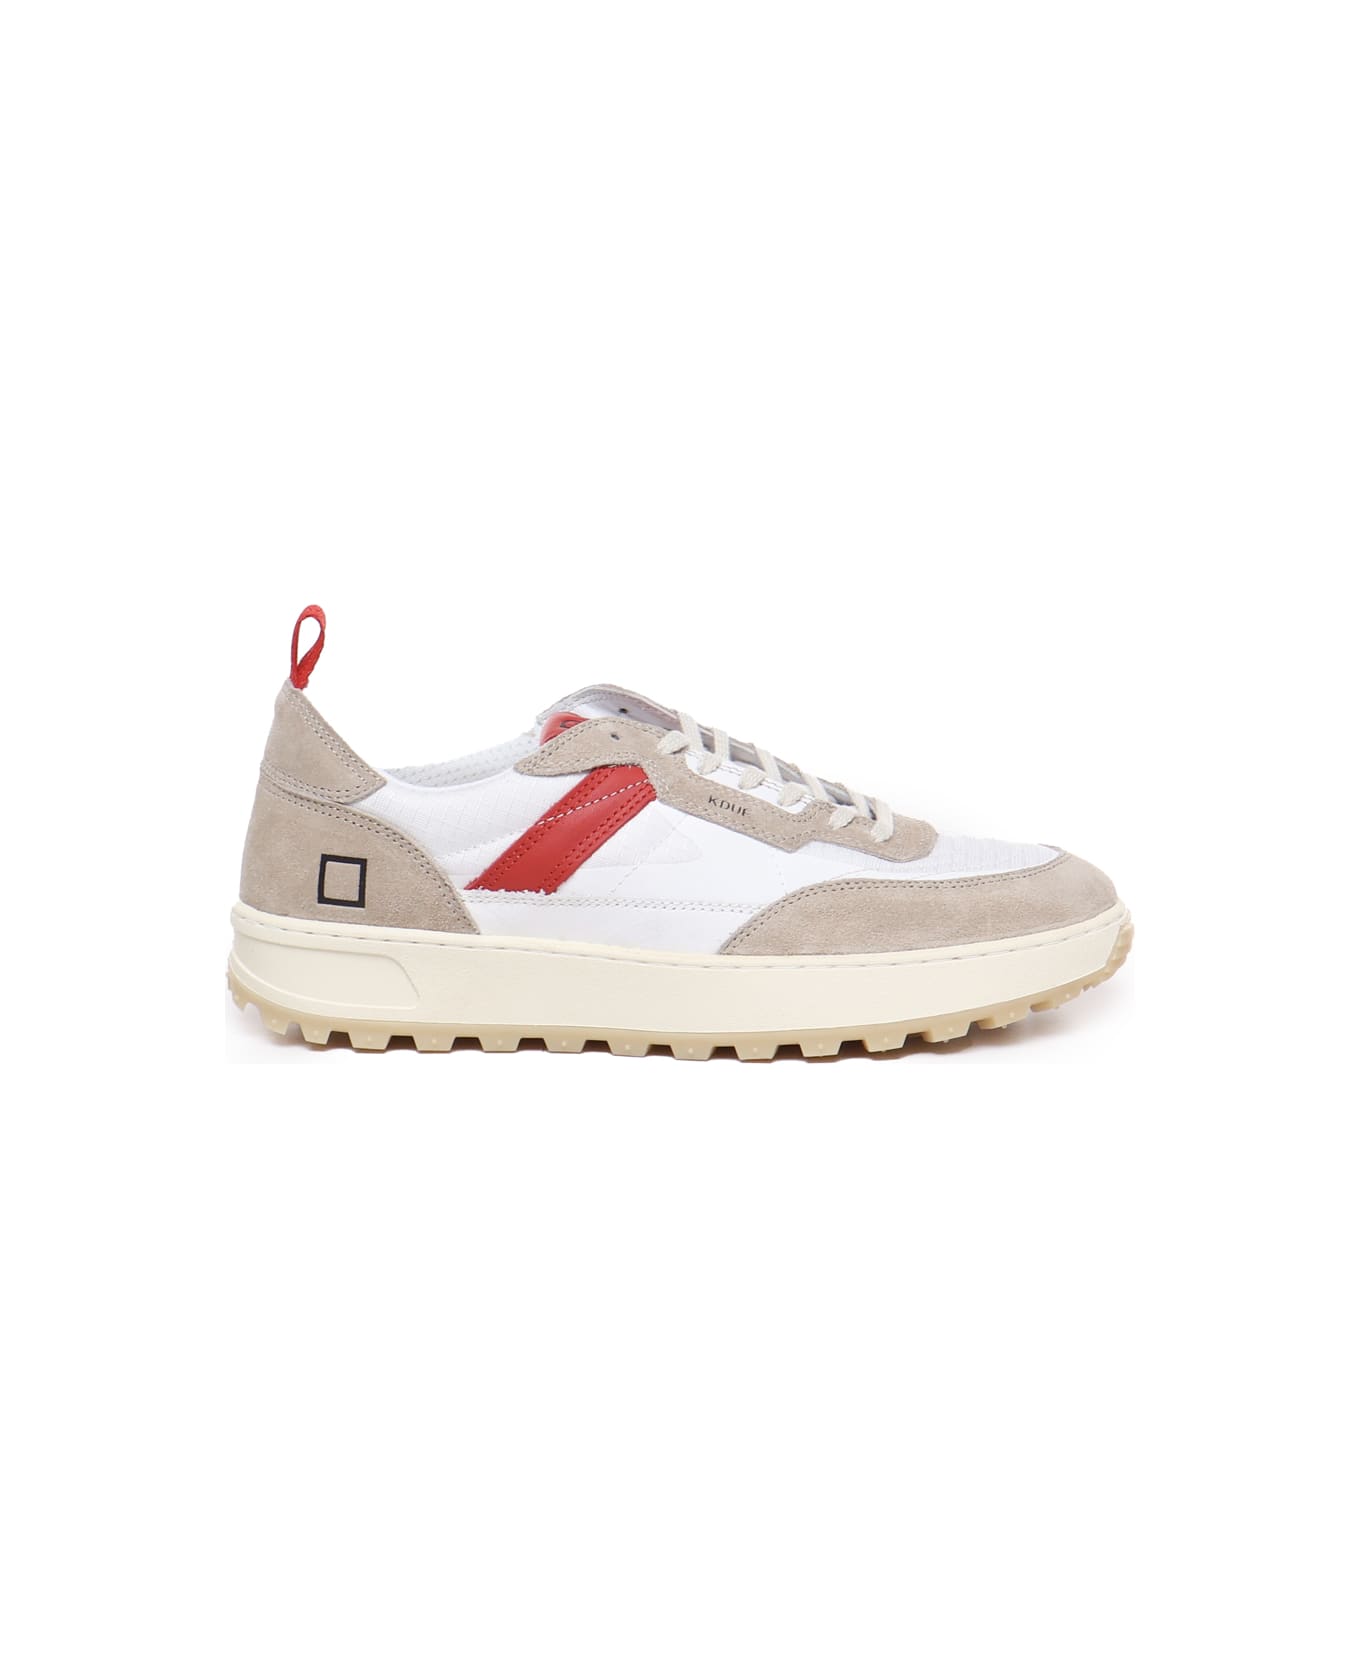 D.A.T.E. Kdue Ripstop Sneakers - White, taupe, red スニーカー